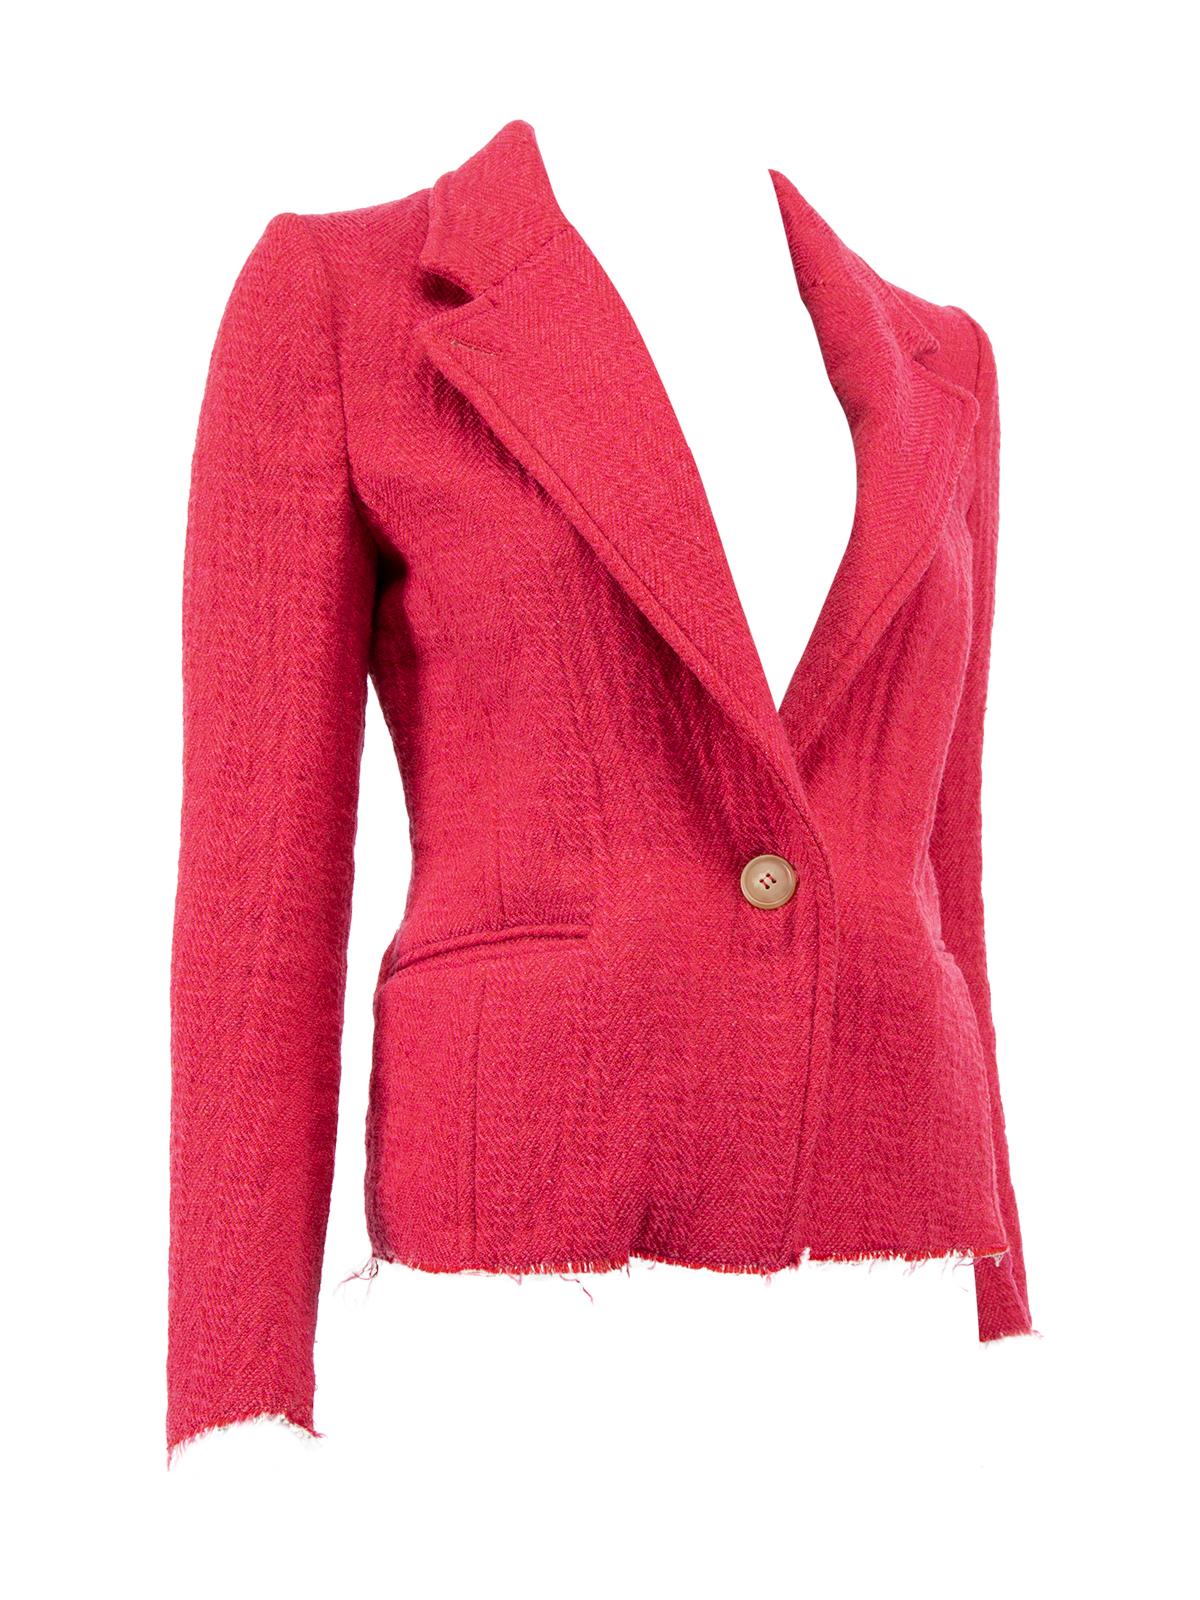 CONDITION is Very good. Hardly any visible wear to blazer apart from some loose threads are evident on this used Isabel Marant Etoile designer resale item. Details Pink Polyester Cotton lining Frayed hem and cuff effect Single button closure